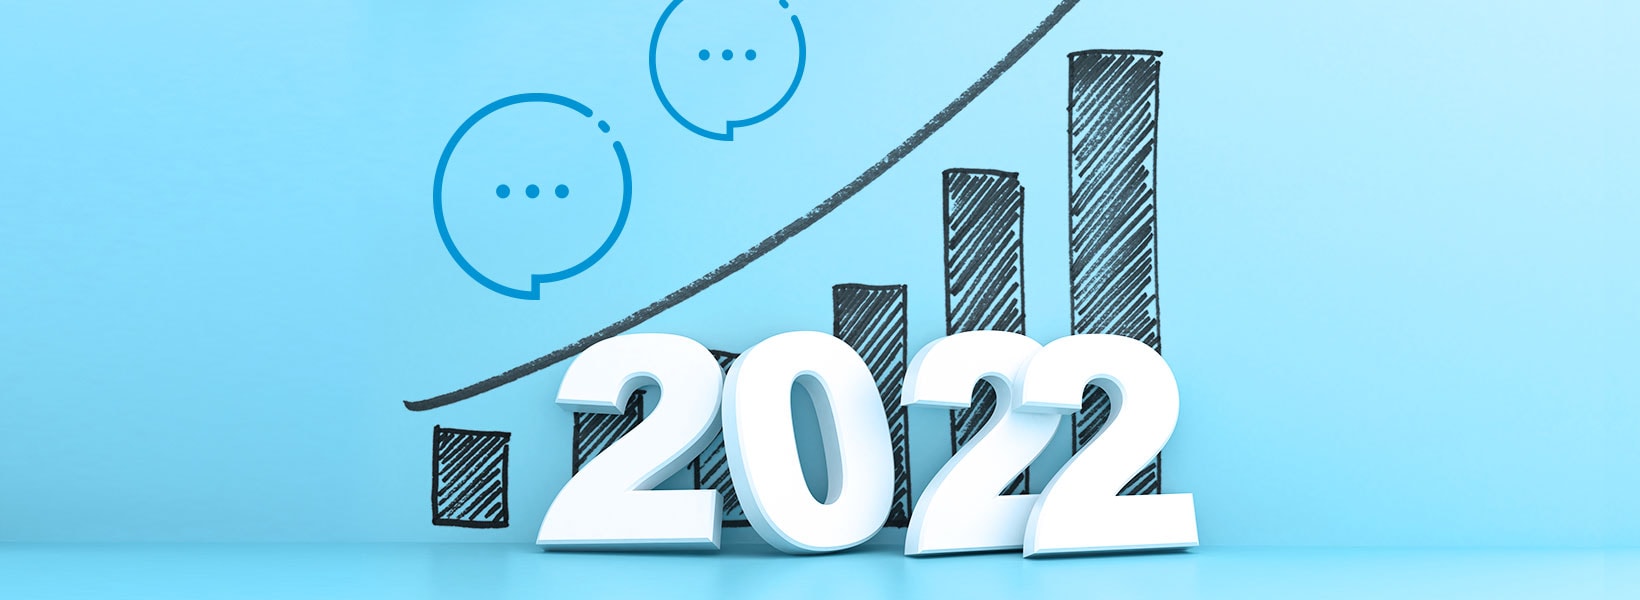 Top 3 Customer Service Trends to Expect in 2022